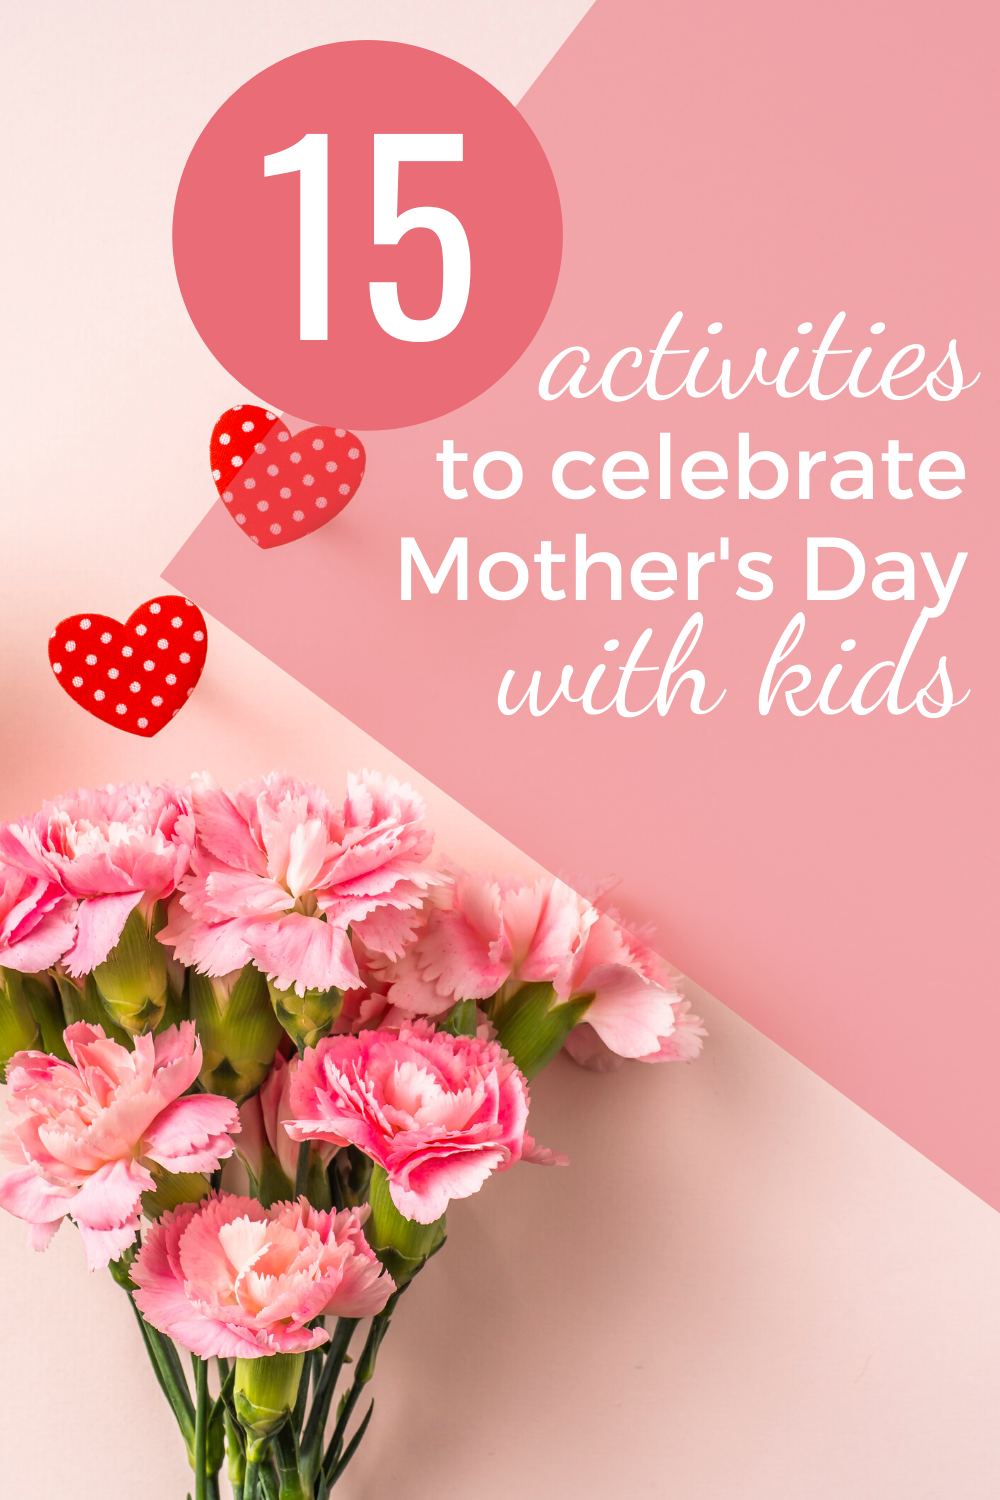 Let kids celebrate mom with one or more of these creative Mother's Day activities for kids. Ideas for gifts, cards, and pampering are included!